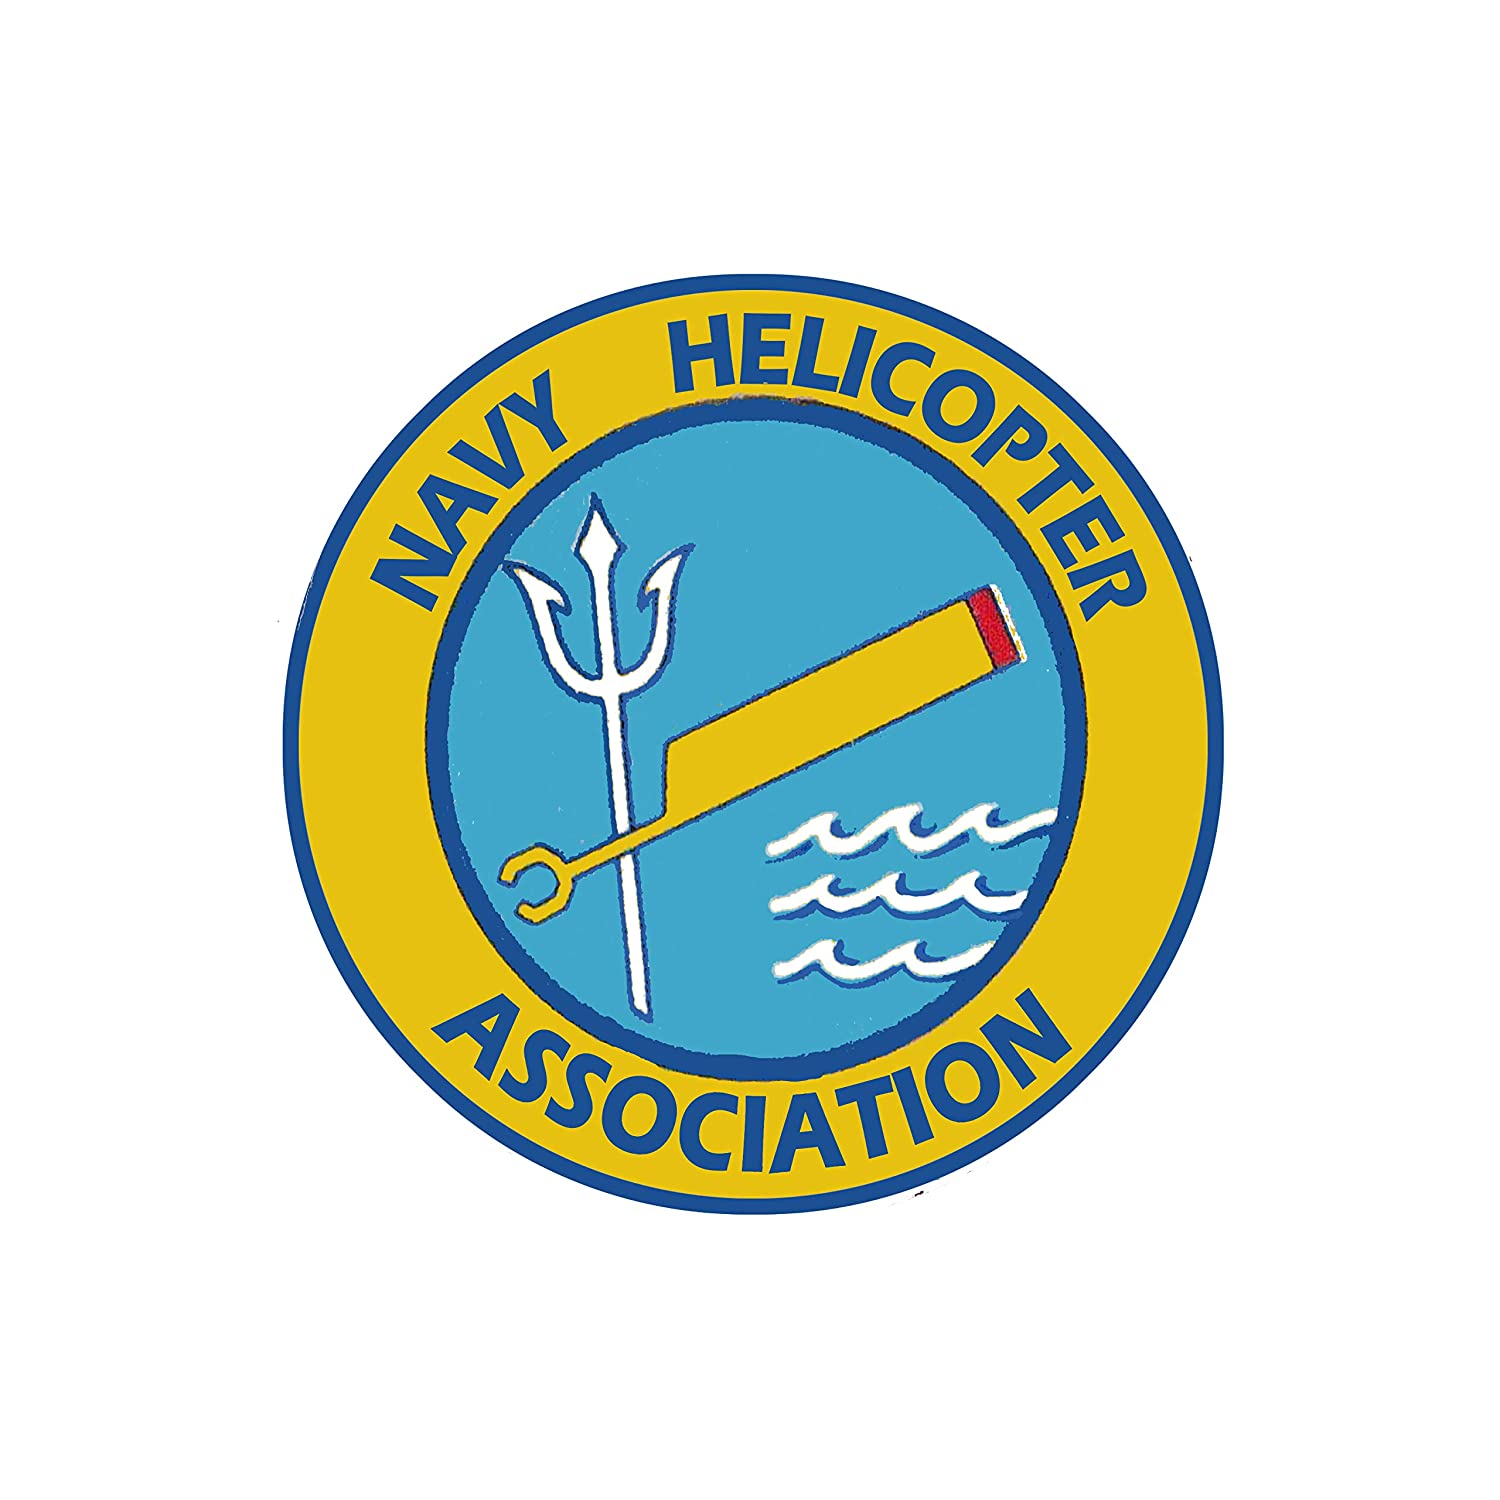 Navy Helicopter Association - Patch Vinyl Decal - Available in Multiple Sizes